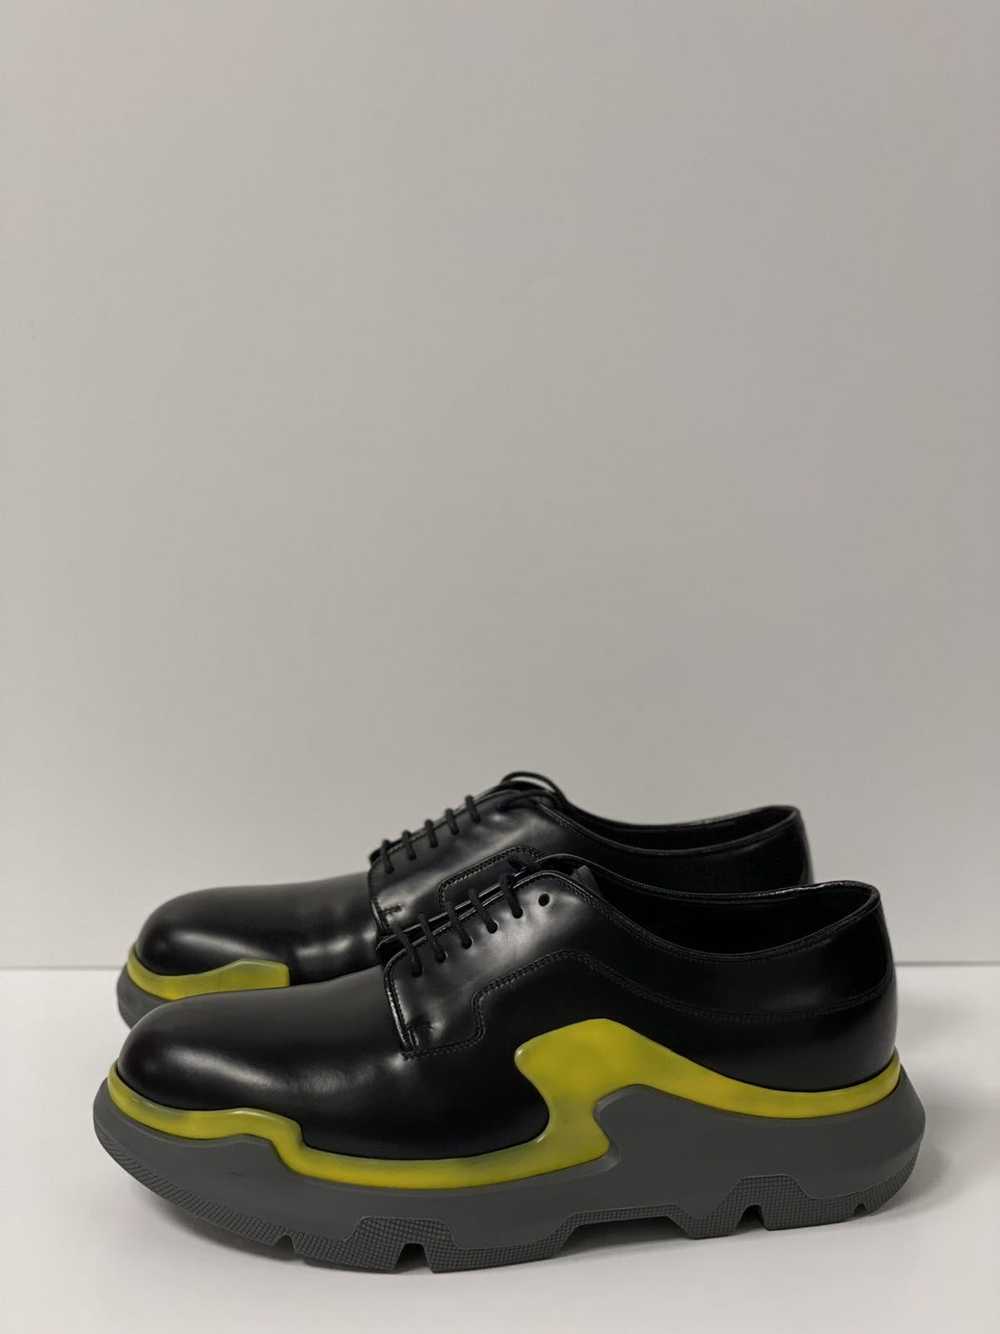 Prada Heavy-Duty Rubber Sole Leather Lace-up Shoes - image 2